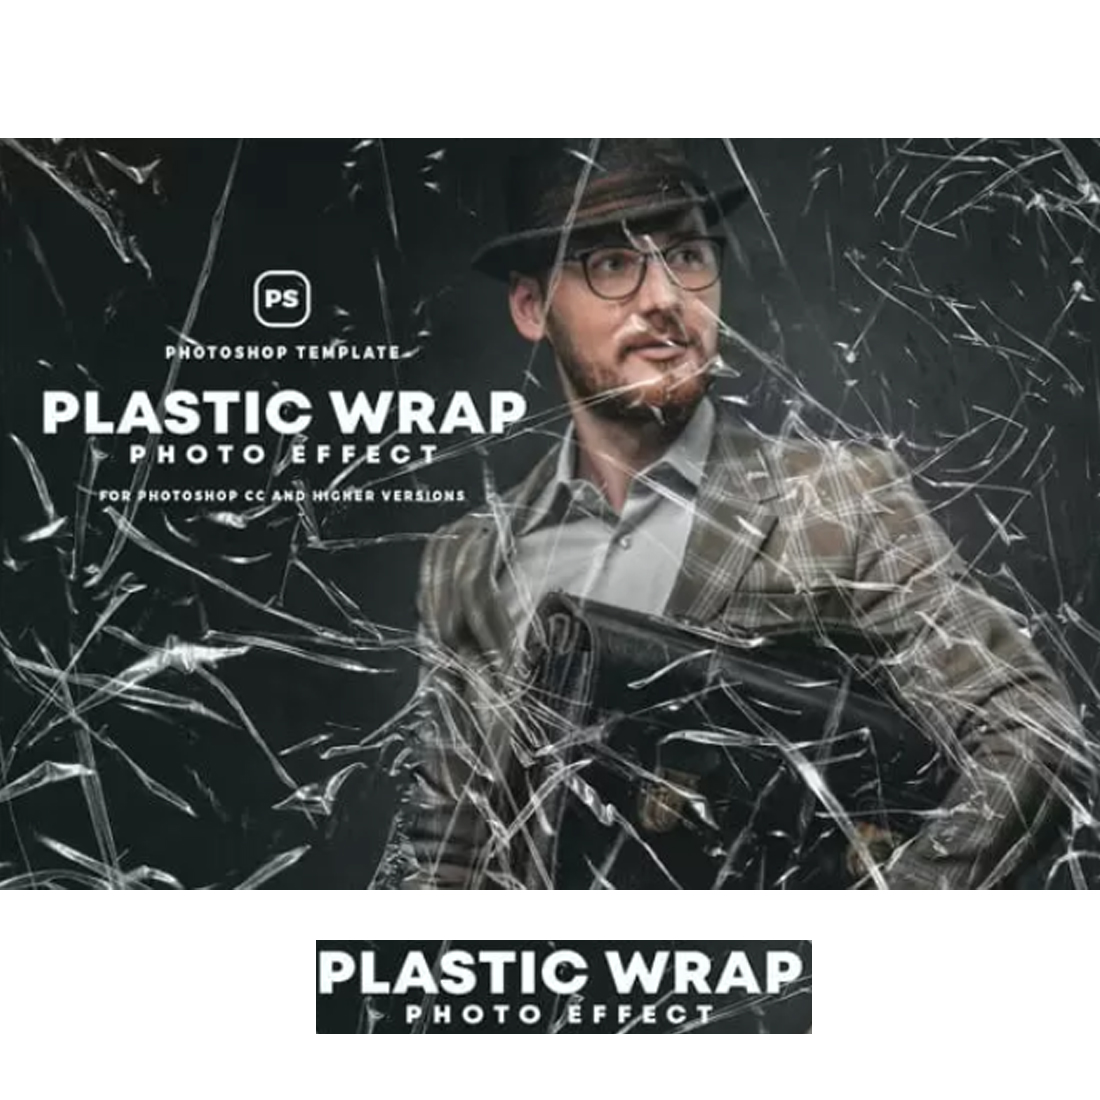 Plastic Wrap Photo Effects - Photoshop Action preview image.